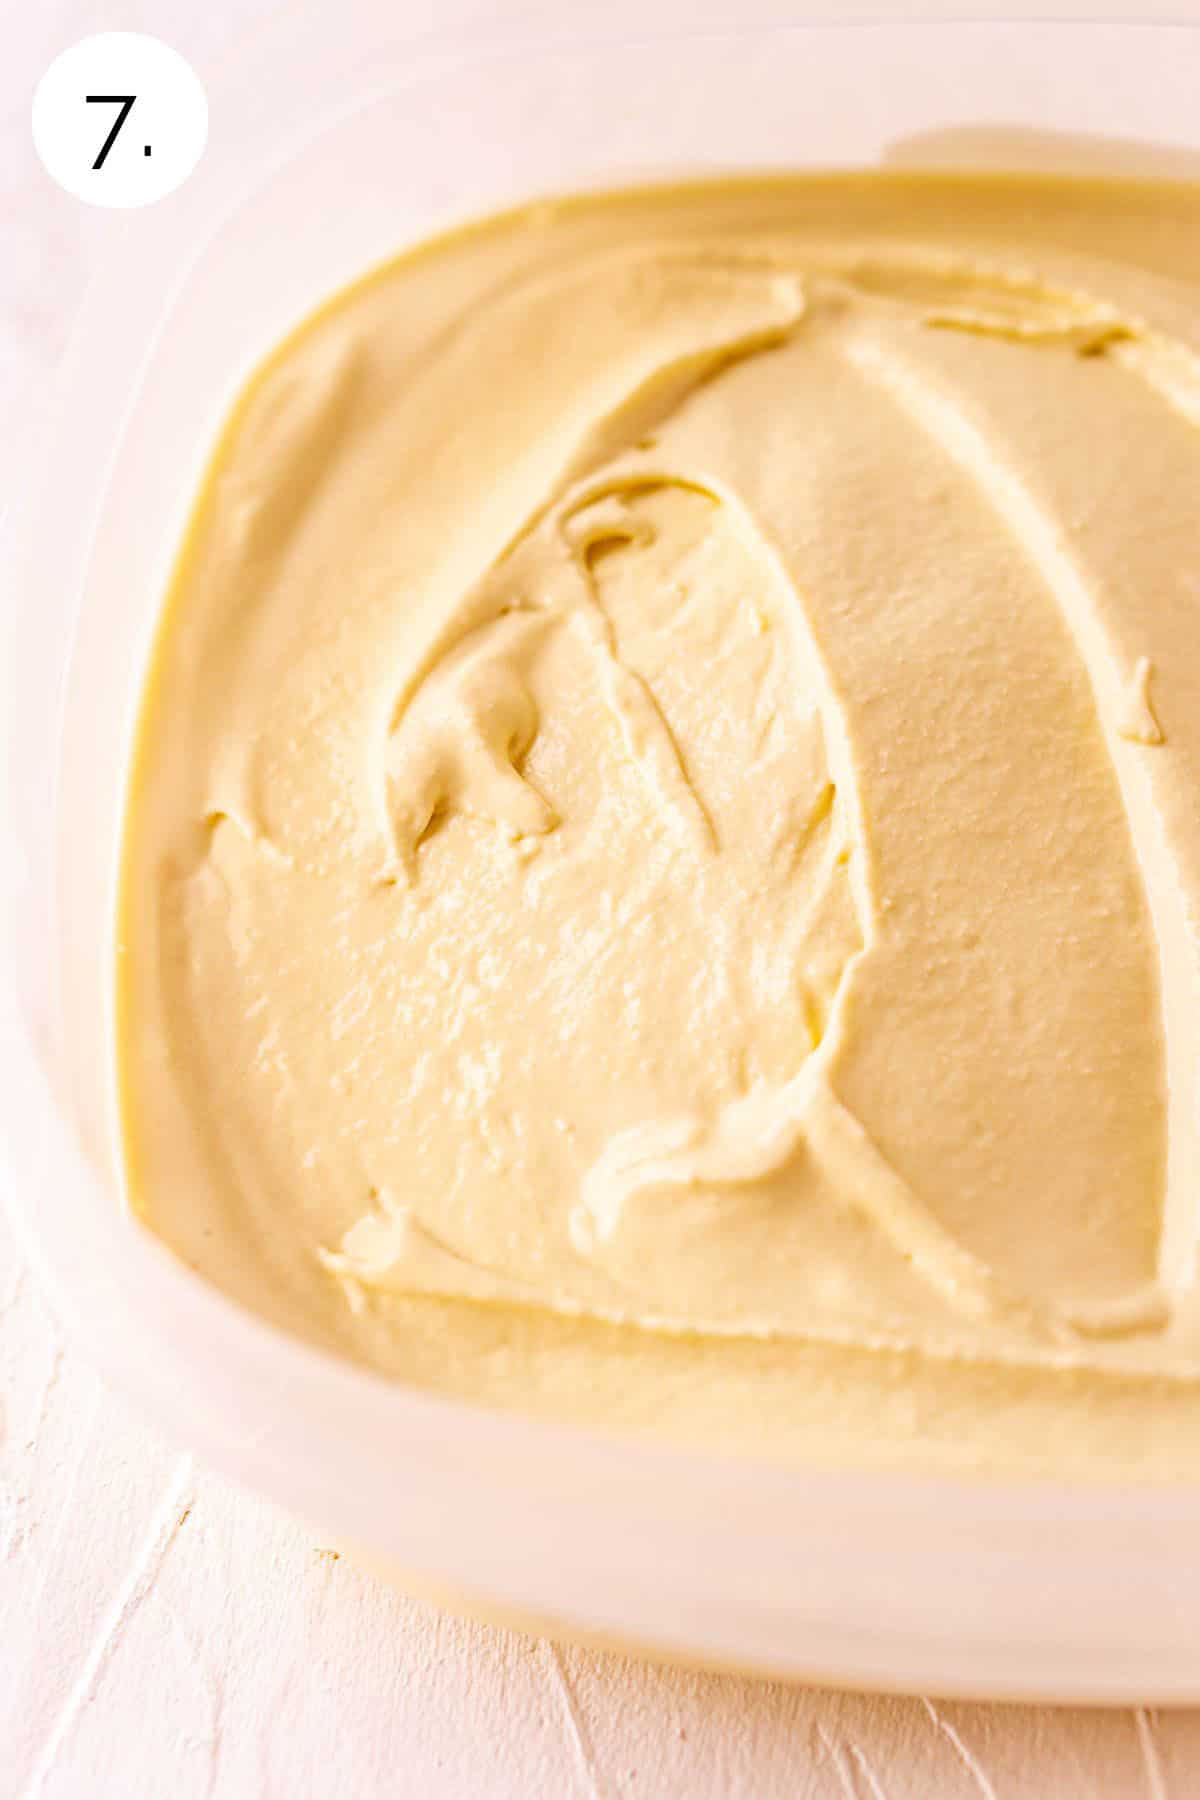 The ice cream spread into a clear plastic container on a white surface before going into the freezer.